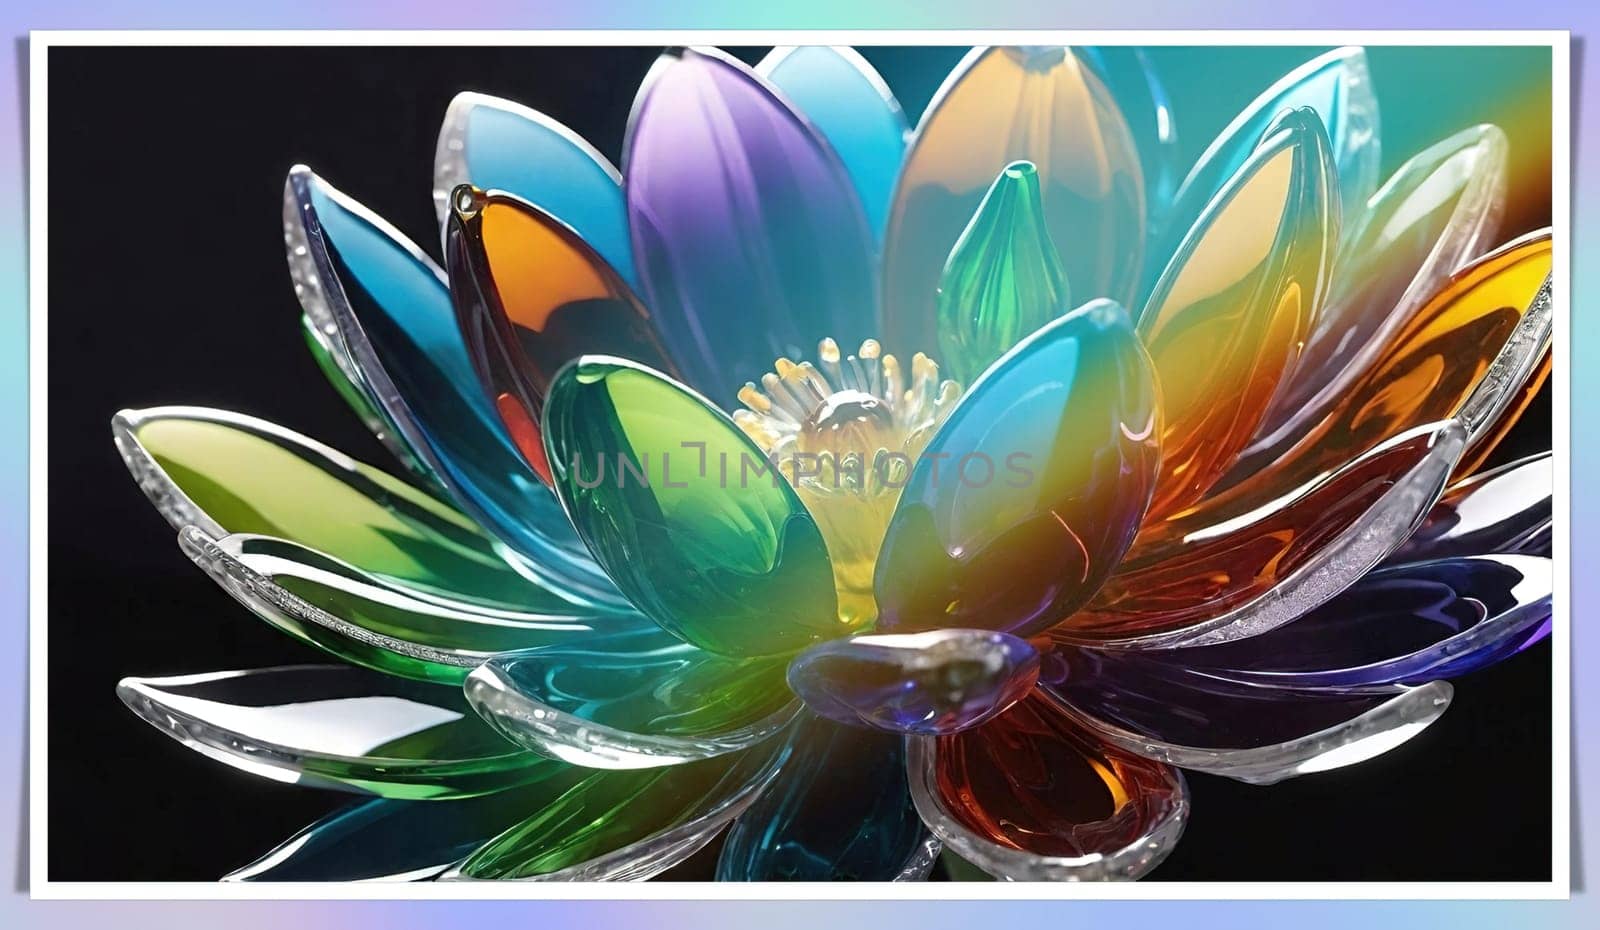 Colorful glass flower on a multicolored background. by yilmazsavaskandag